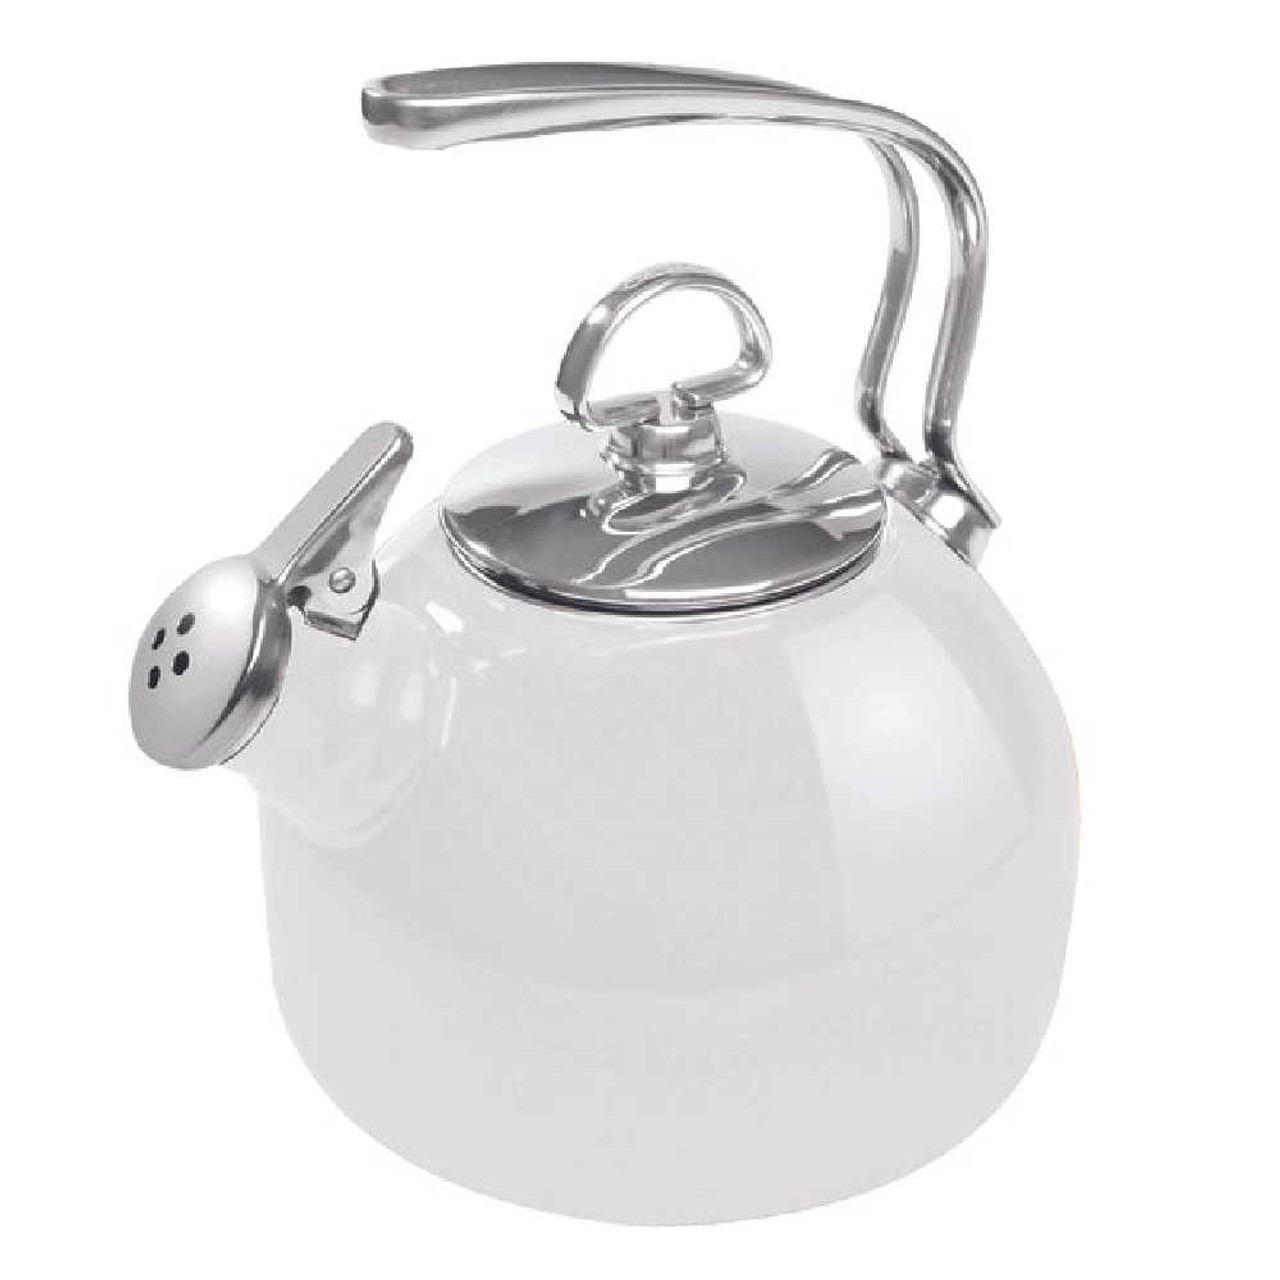 https://cdn11.bigcommerce.com/s-hccytny0od/images/stencil/1280x1280/products/1388/17637/Chantal_Enamel-on-Steel_Classic_Tea_Kettle_White__14813.1702478672.jpg?c=2?imbypass=on